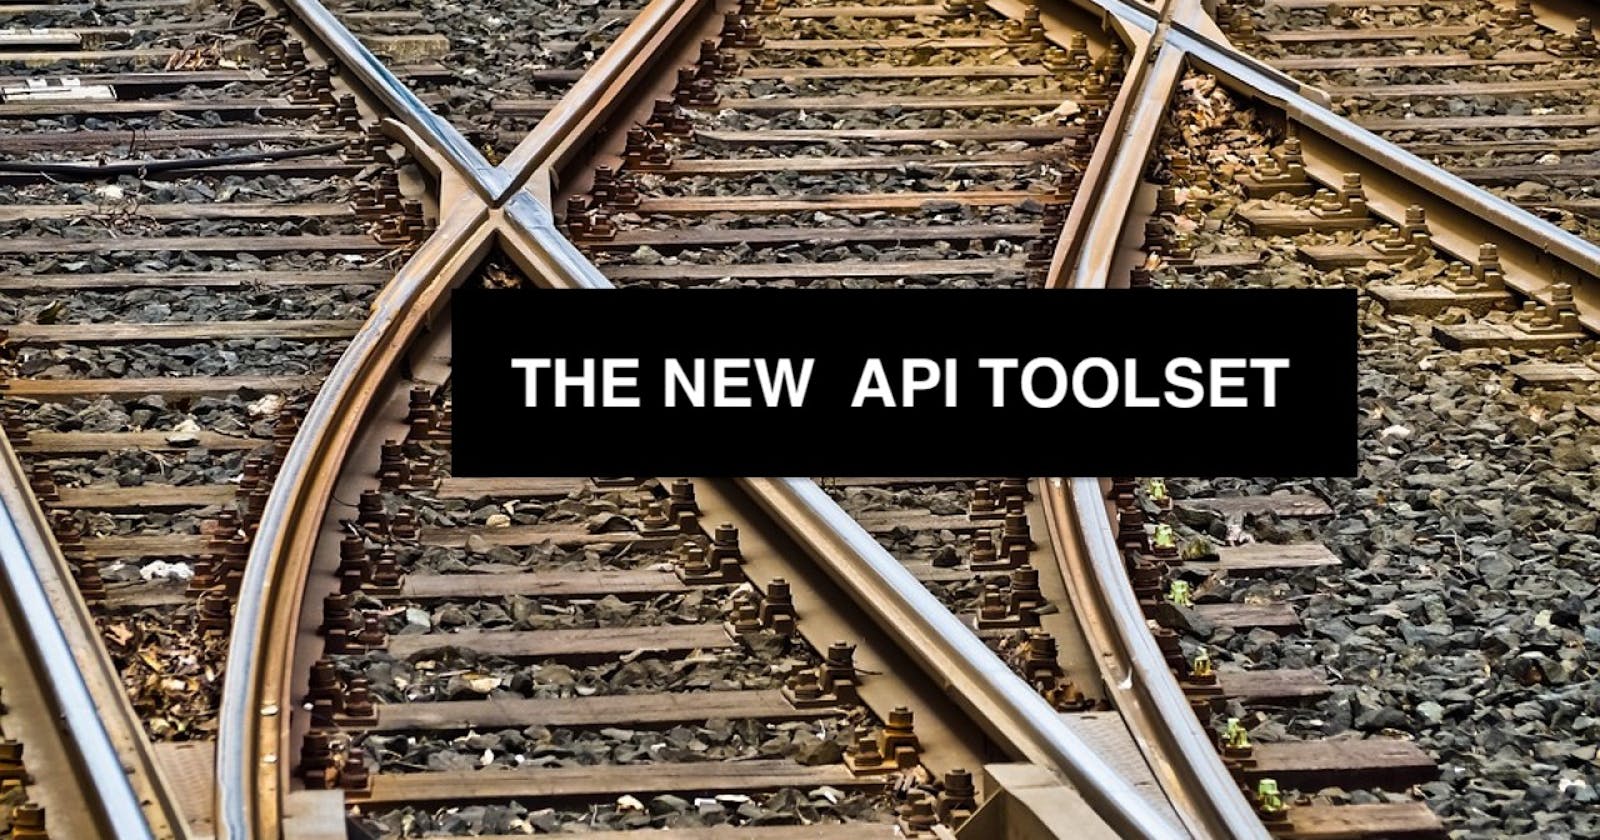 Building an API? Here's what you need